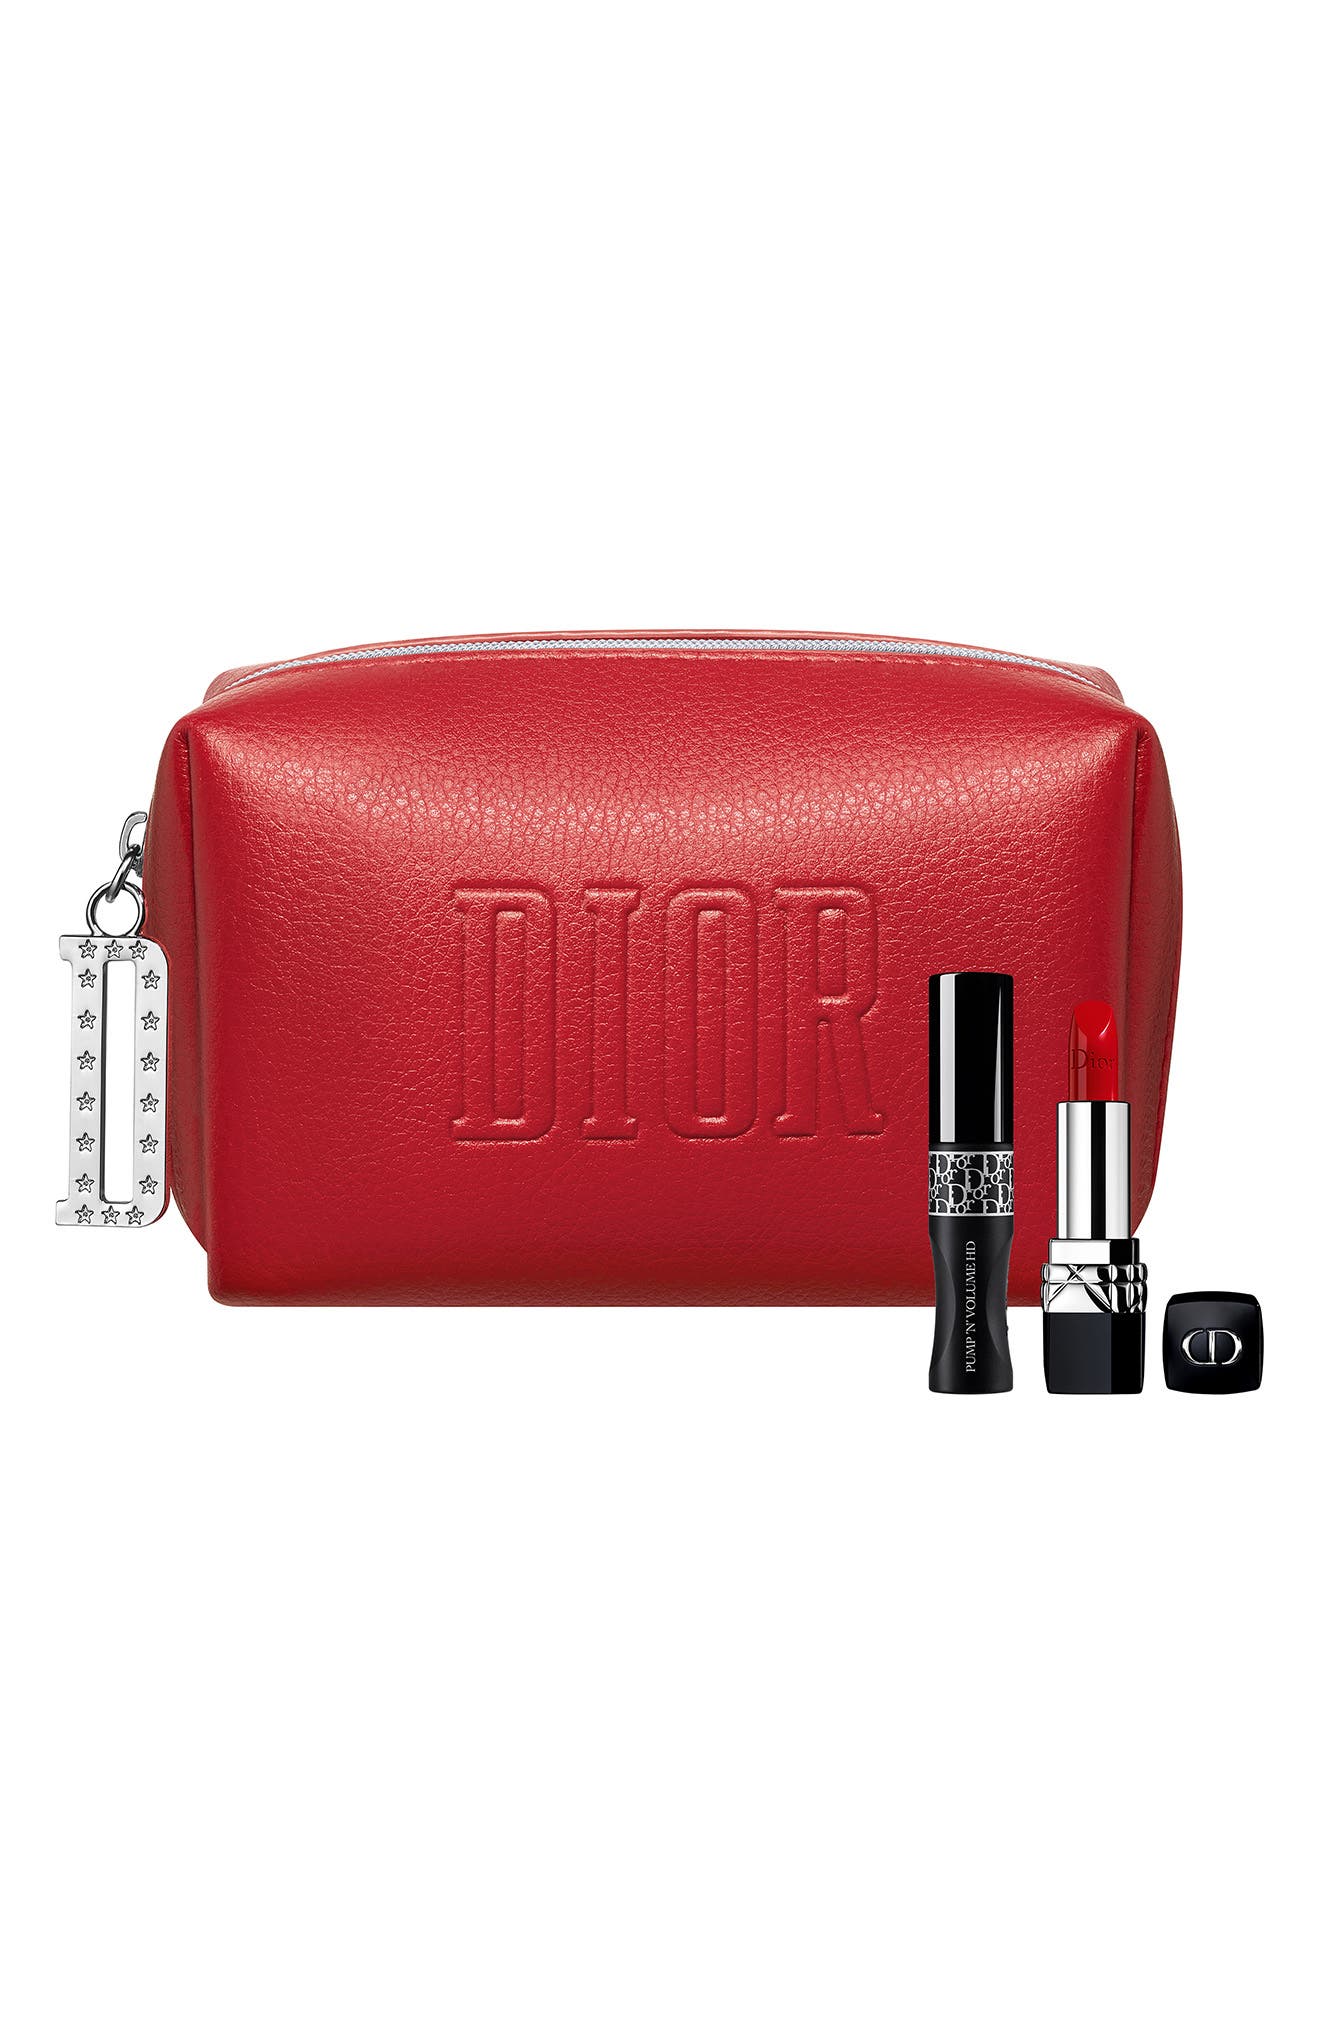 Dior Gift with Purchase | Nordstrom